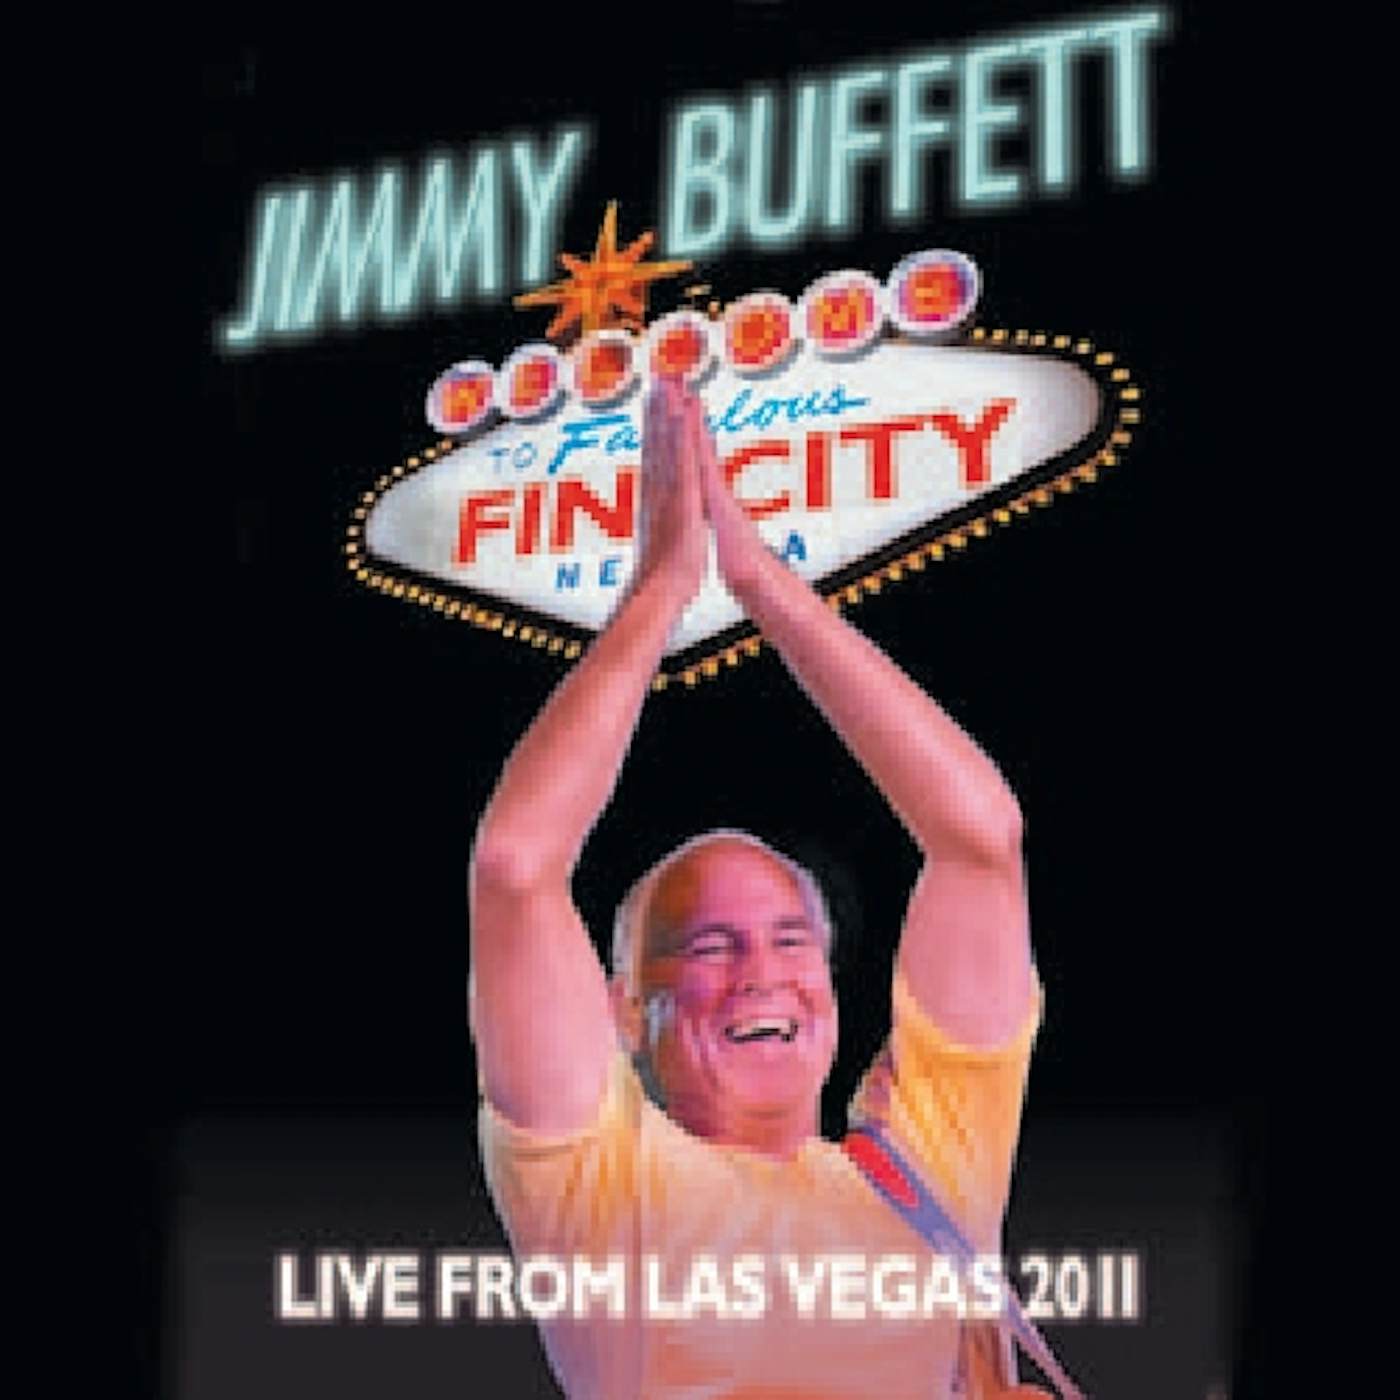 Jimmy Buffett WELCOME TO FIN CITY: LIVE FROM LAS VEGAS 2011 CD